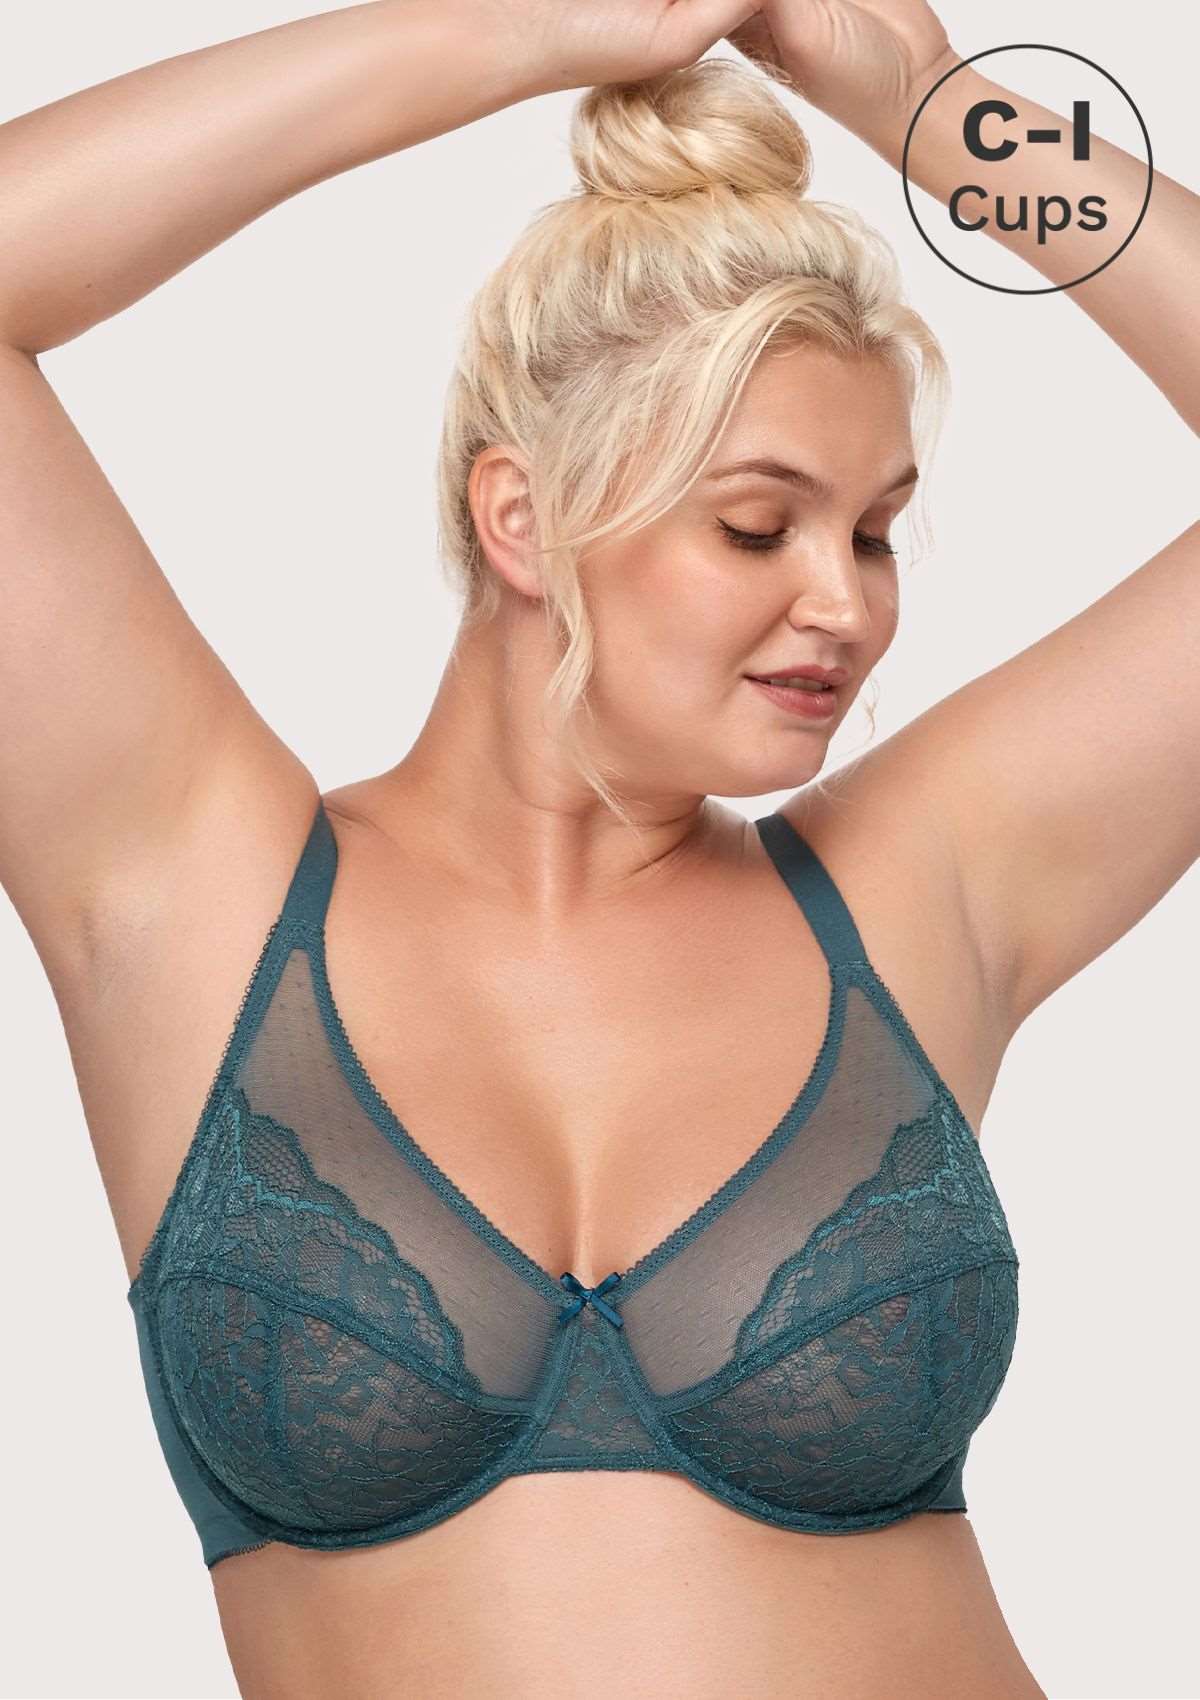 HSIA Enchante Full Coverage Bra: Supportive Bra For Big Busts - Royal Blue / 36 / DD/E